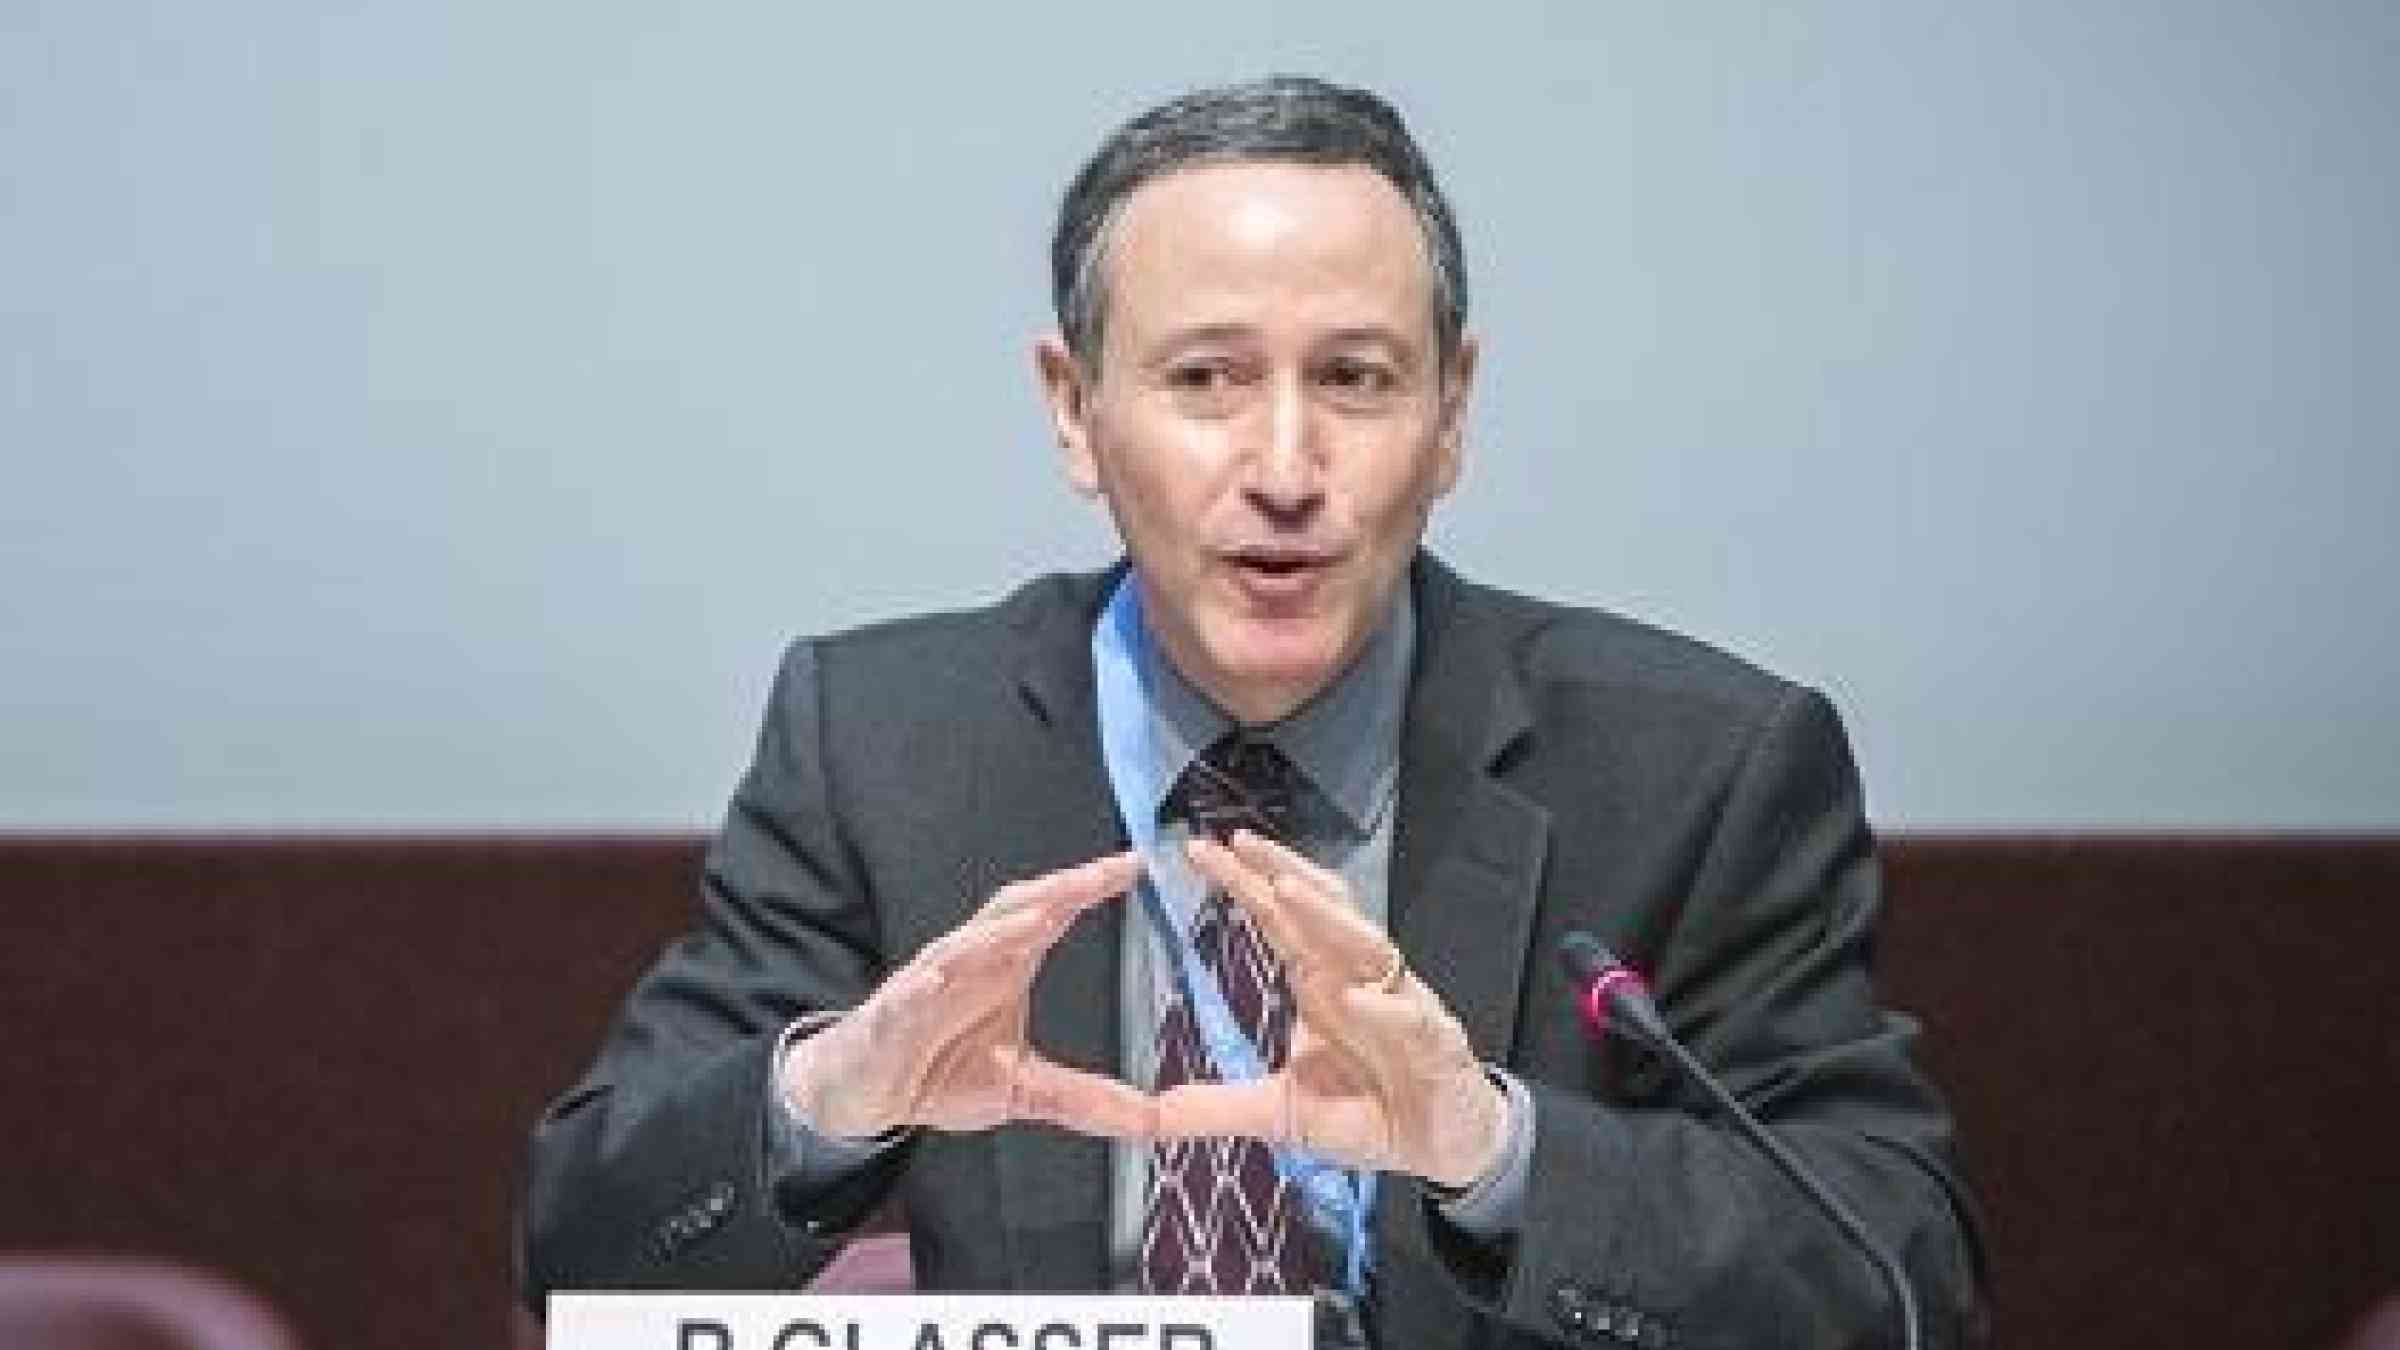 The role of women is critical in disaster risk reduction, says Mr. Robert Glasser, Special Representative of the UN Secretary-General for Disaster Risk Reduction (Photo: UNISDR/Fabio Chironi)